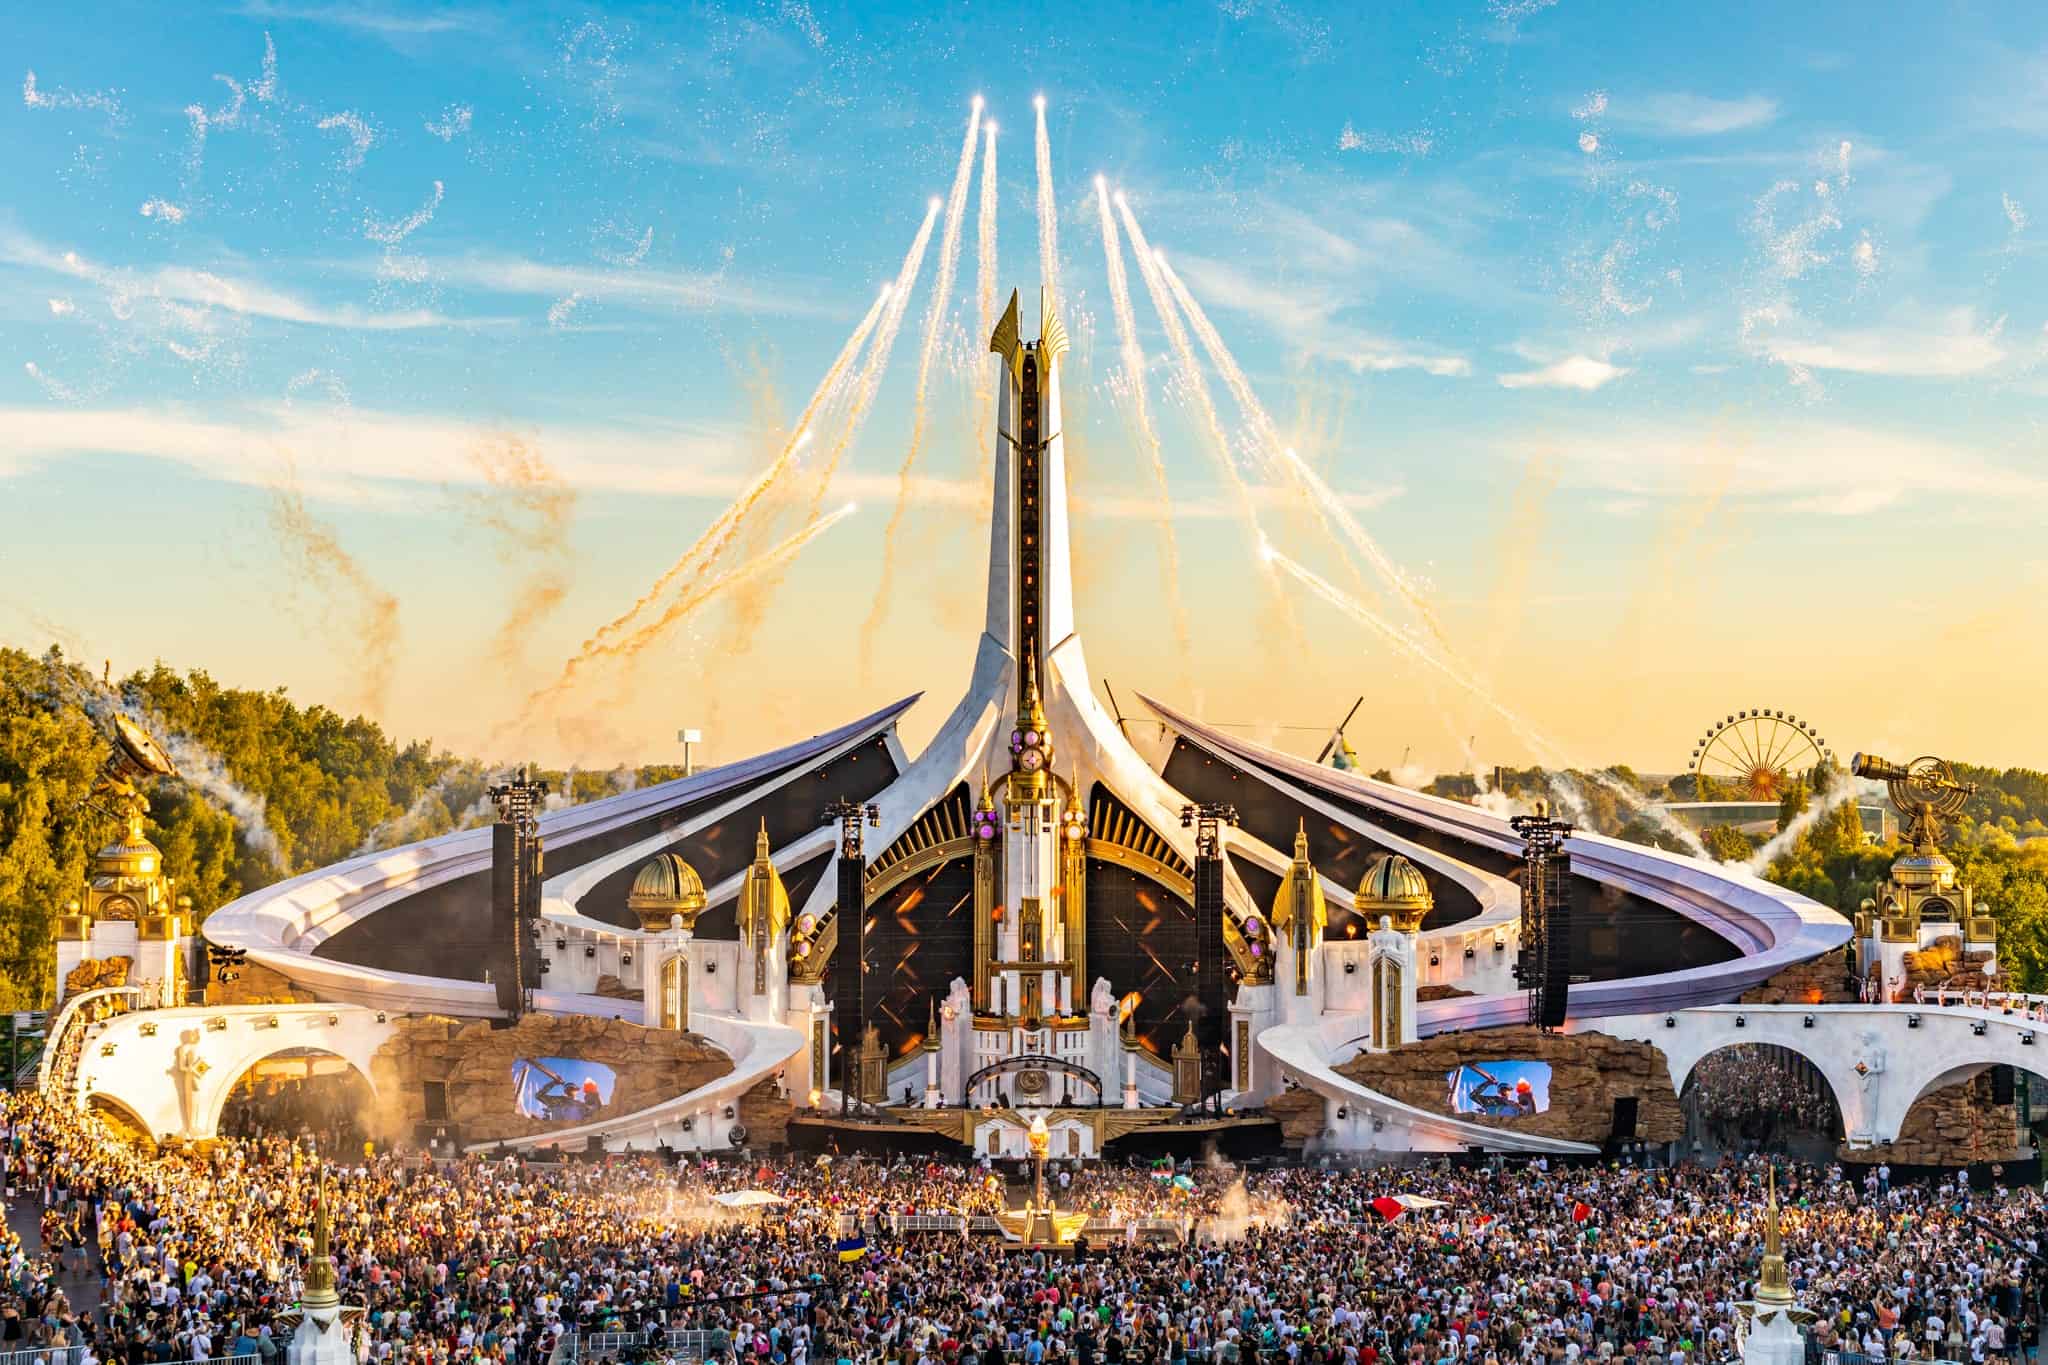 Tomorrowland announces ‘The Reflection of Love’ theme for Brazil event